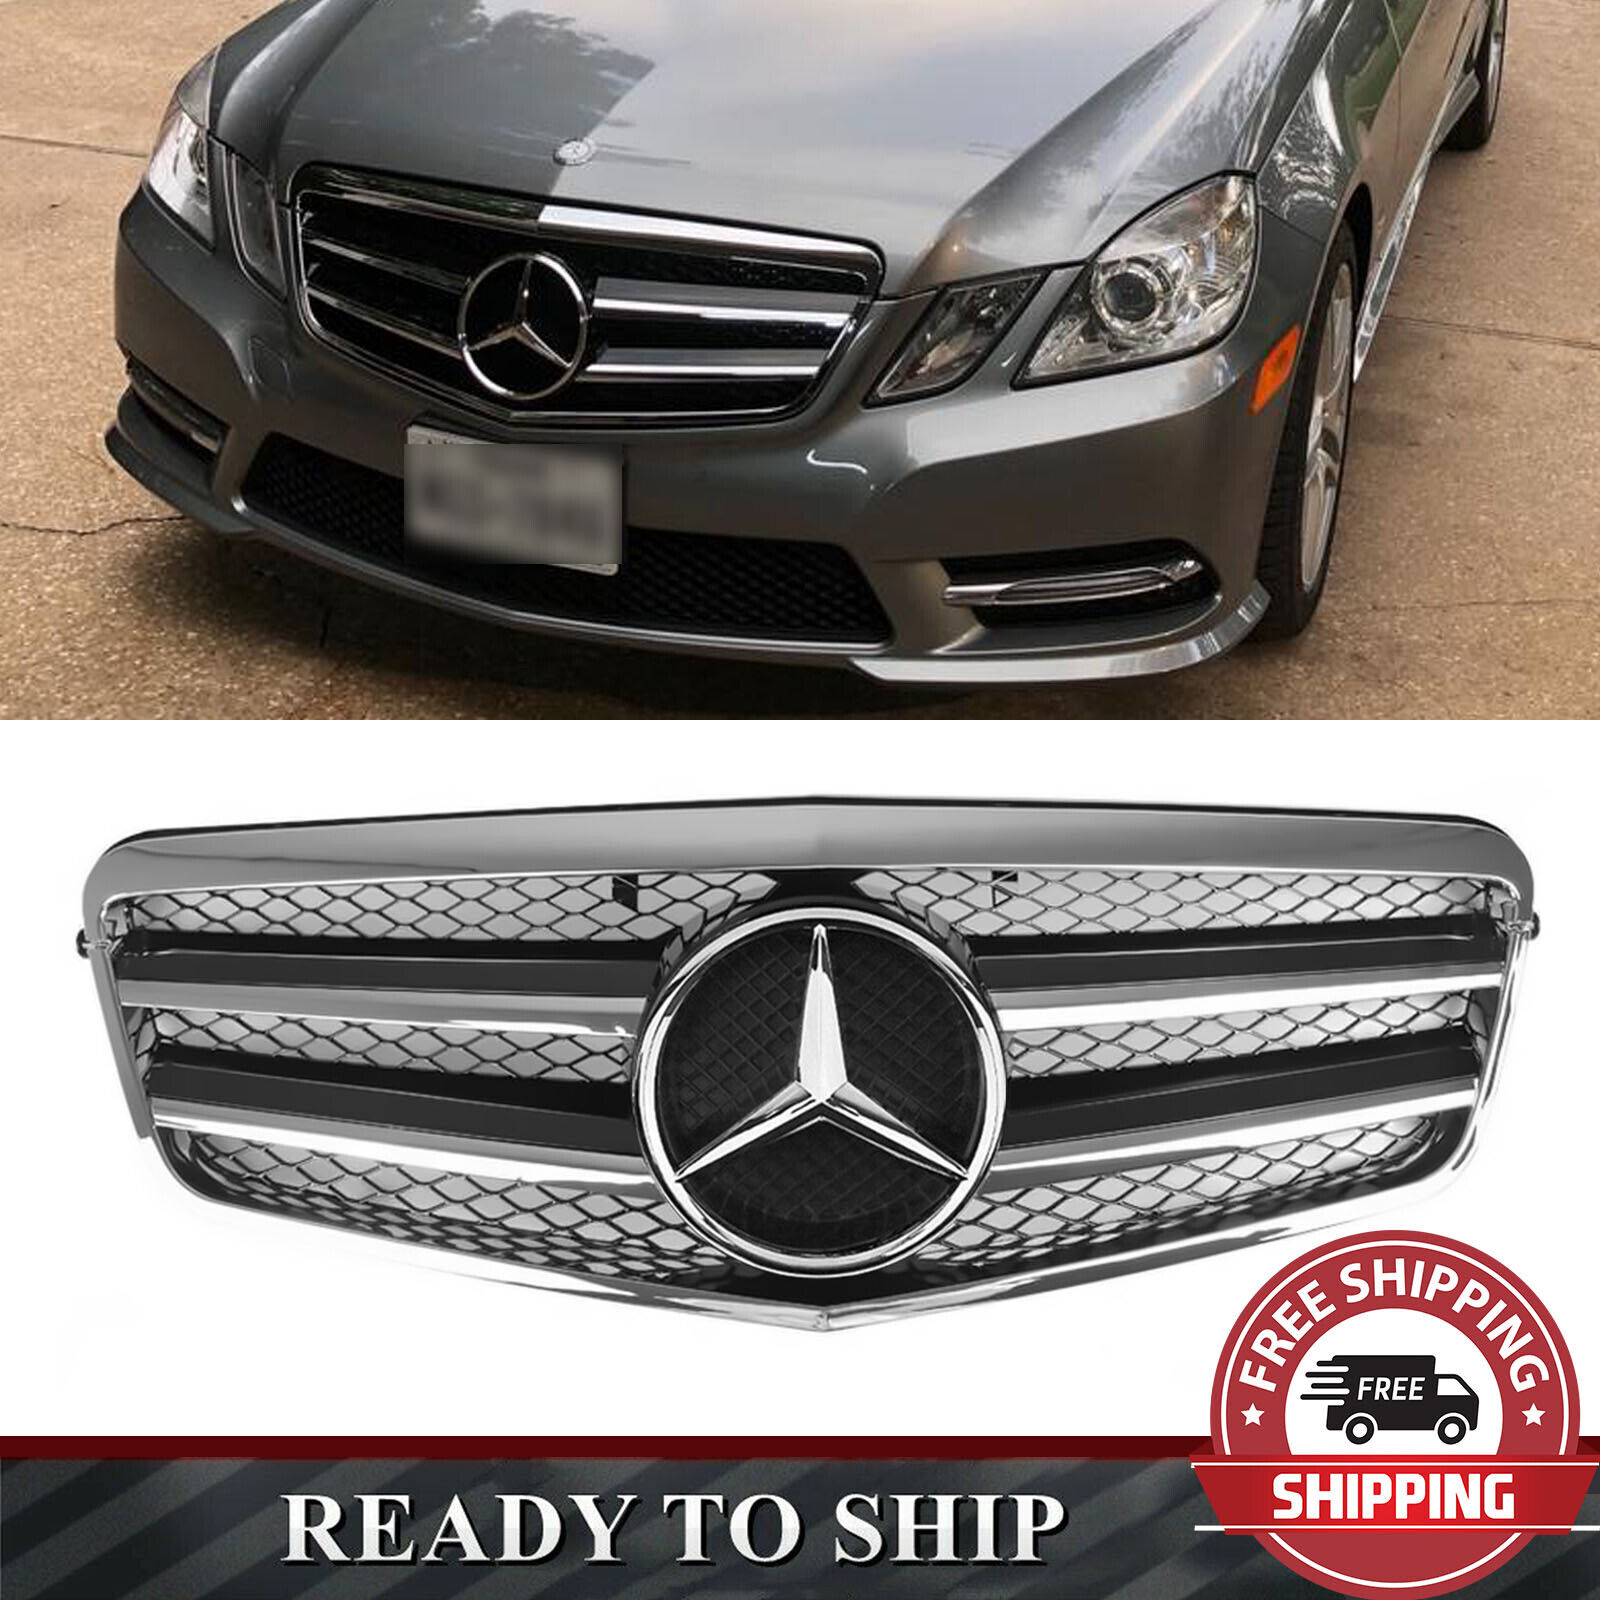 AMG Style Front Grille Grill +Star For Mercedes Benz W212 E250 E350 E550 2010-13